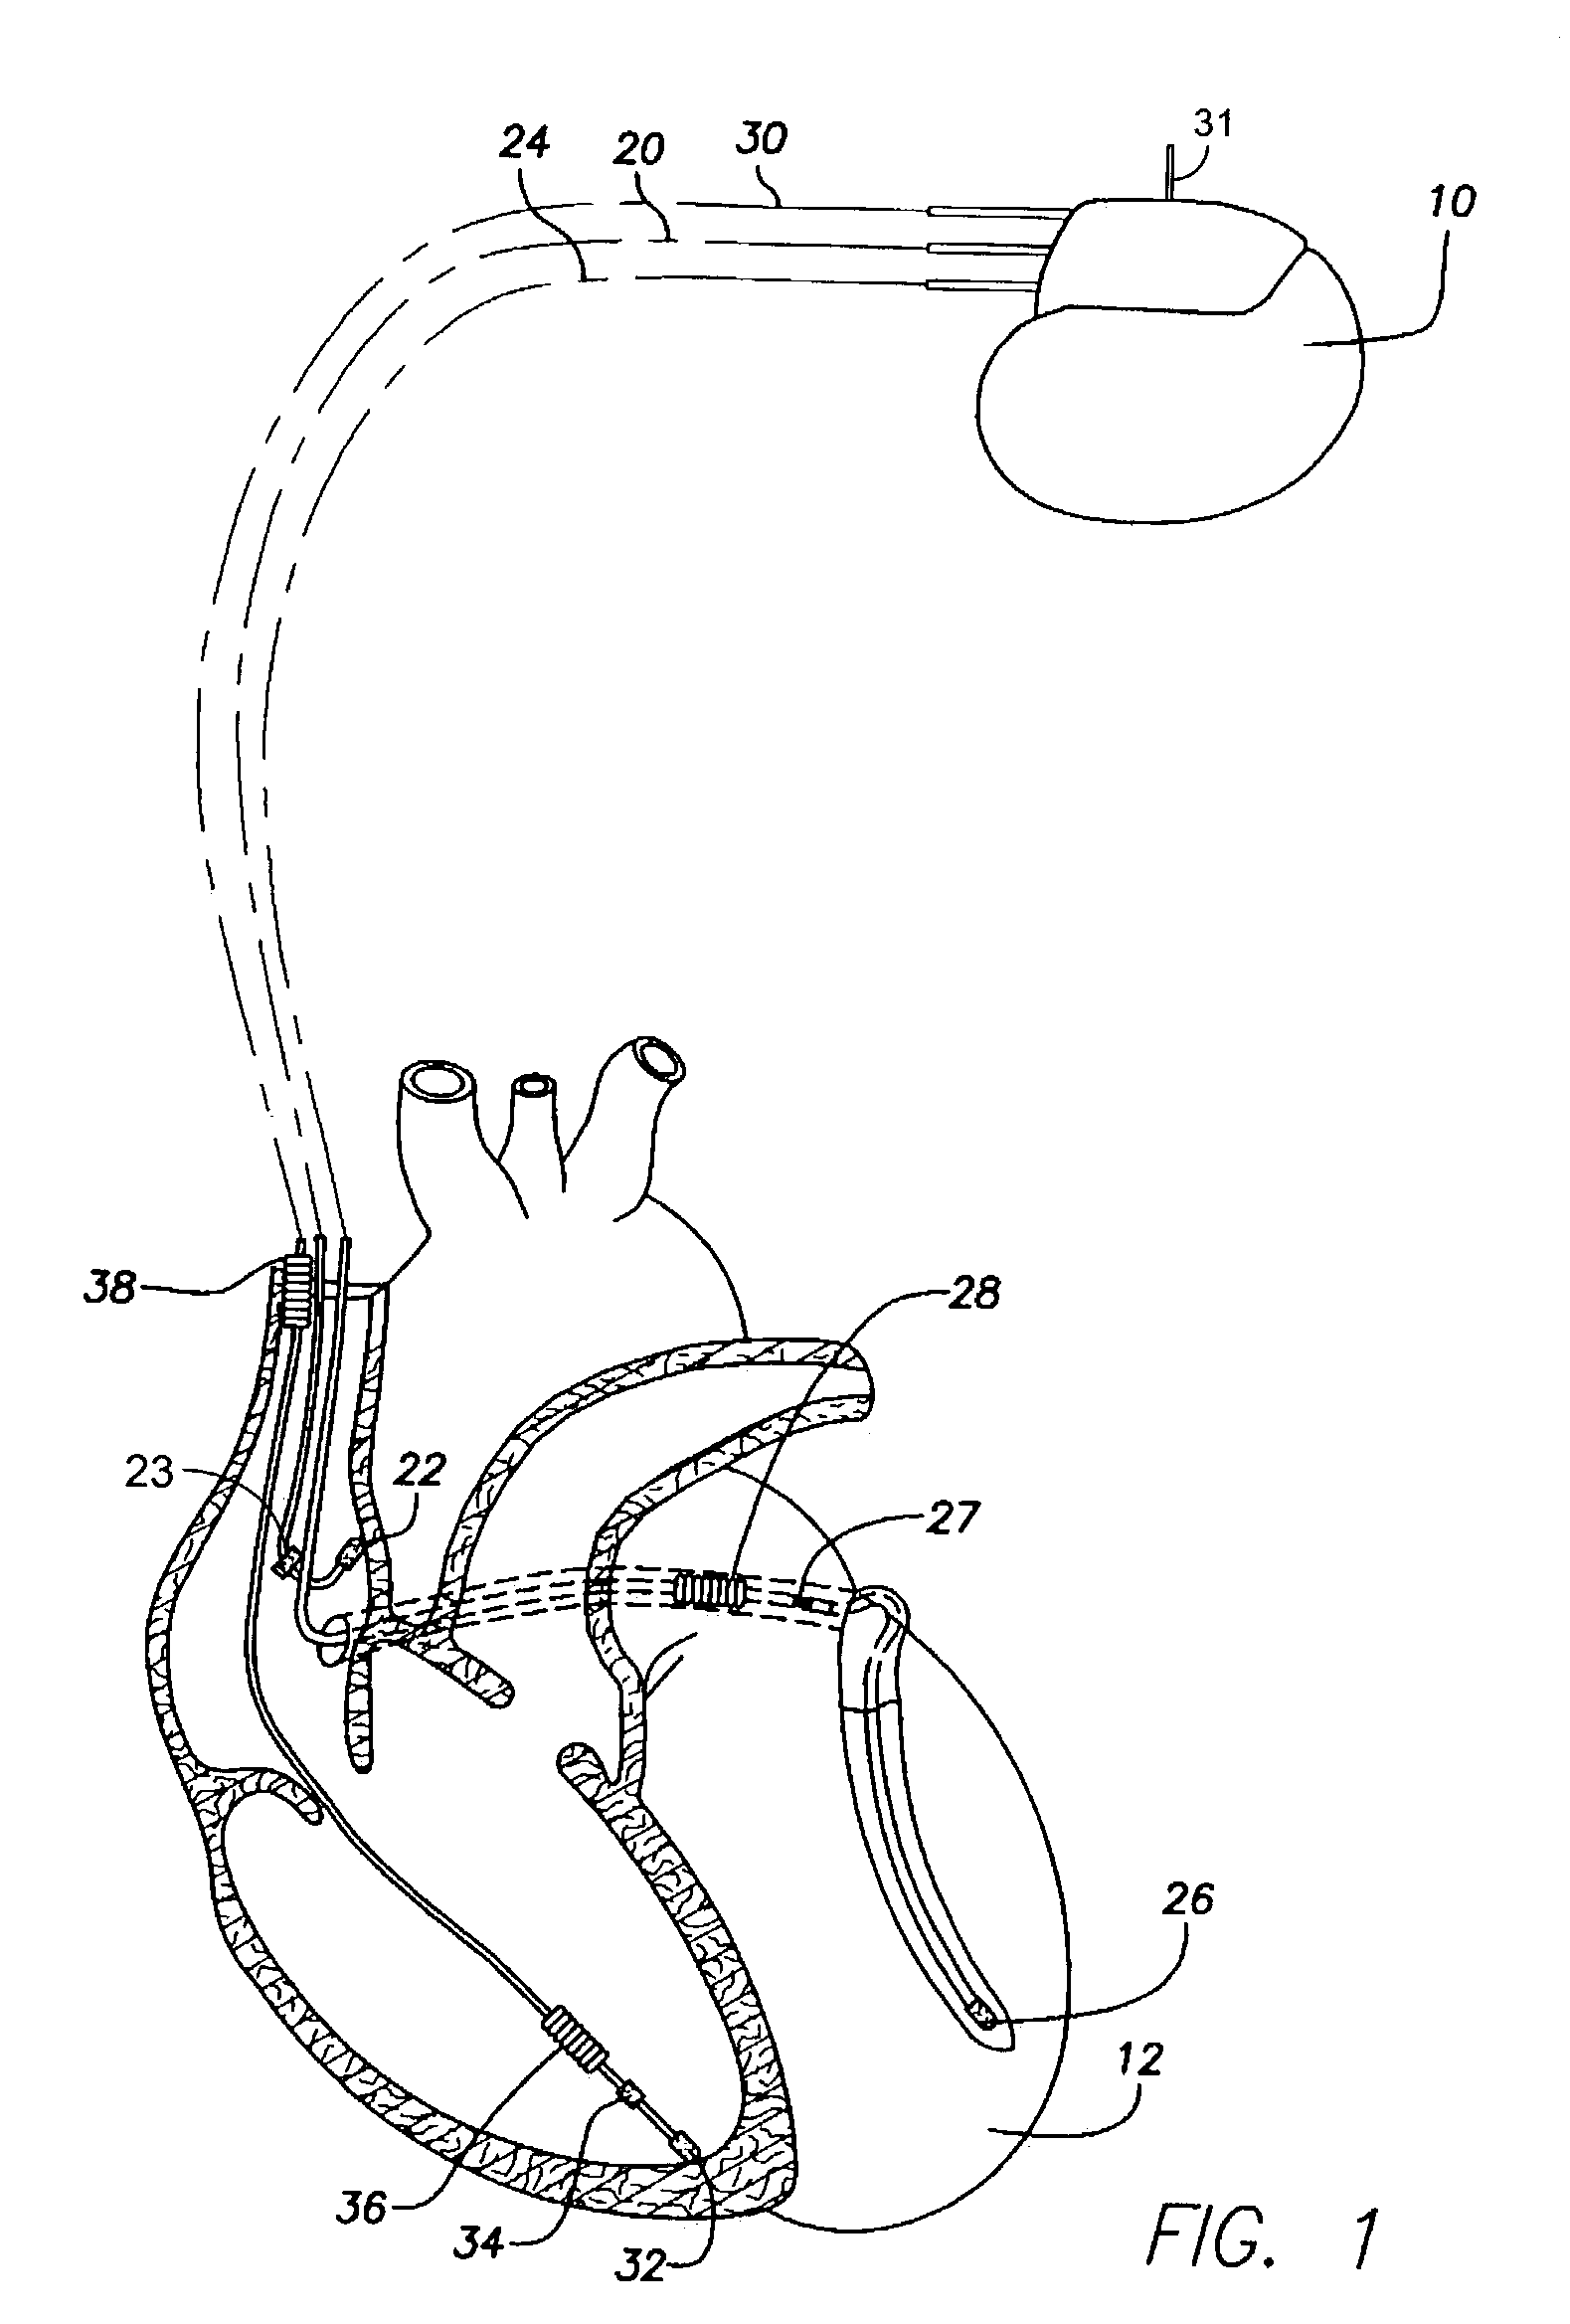 System and method for detecting cardiac ischemia based on T-waves using an implantable medical device